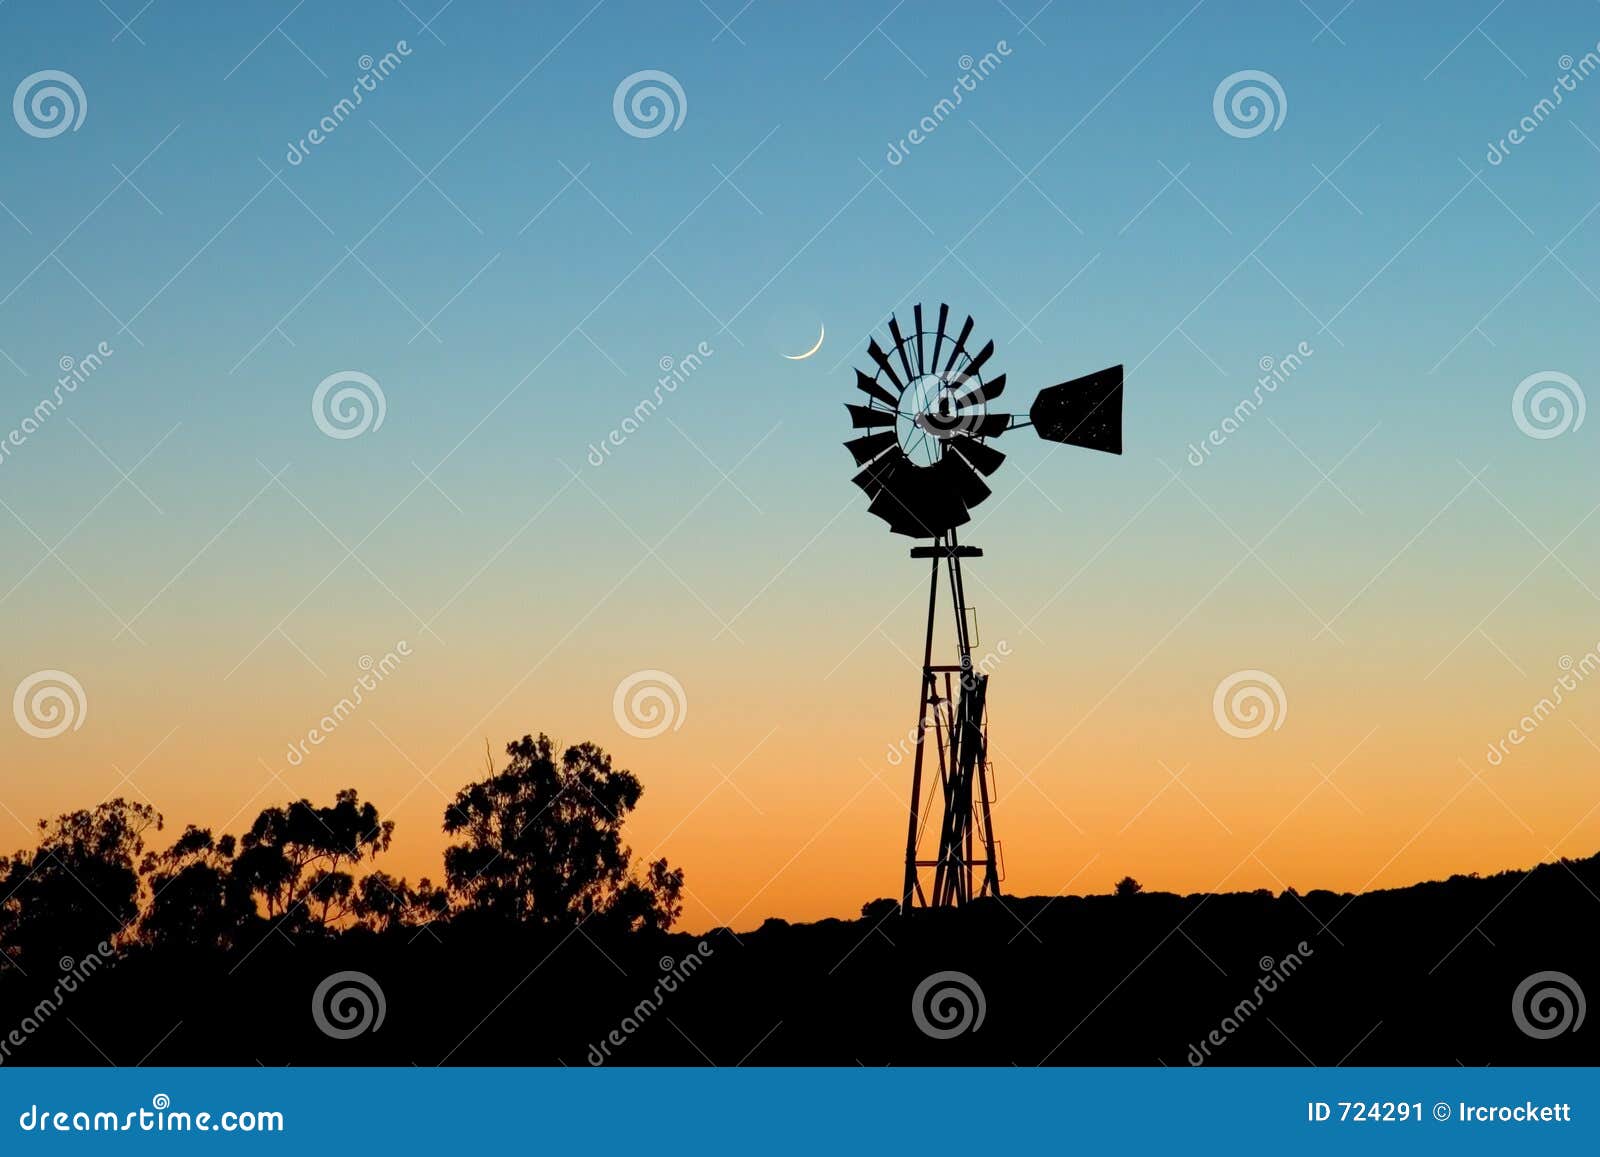 windmill and moon